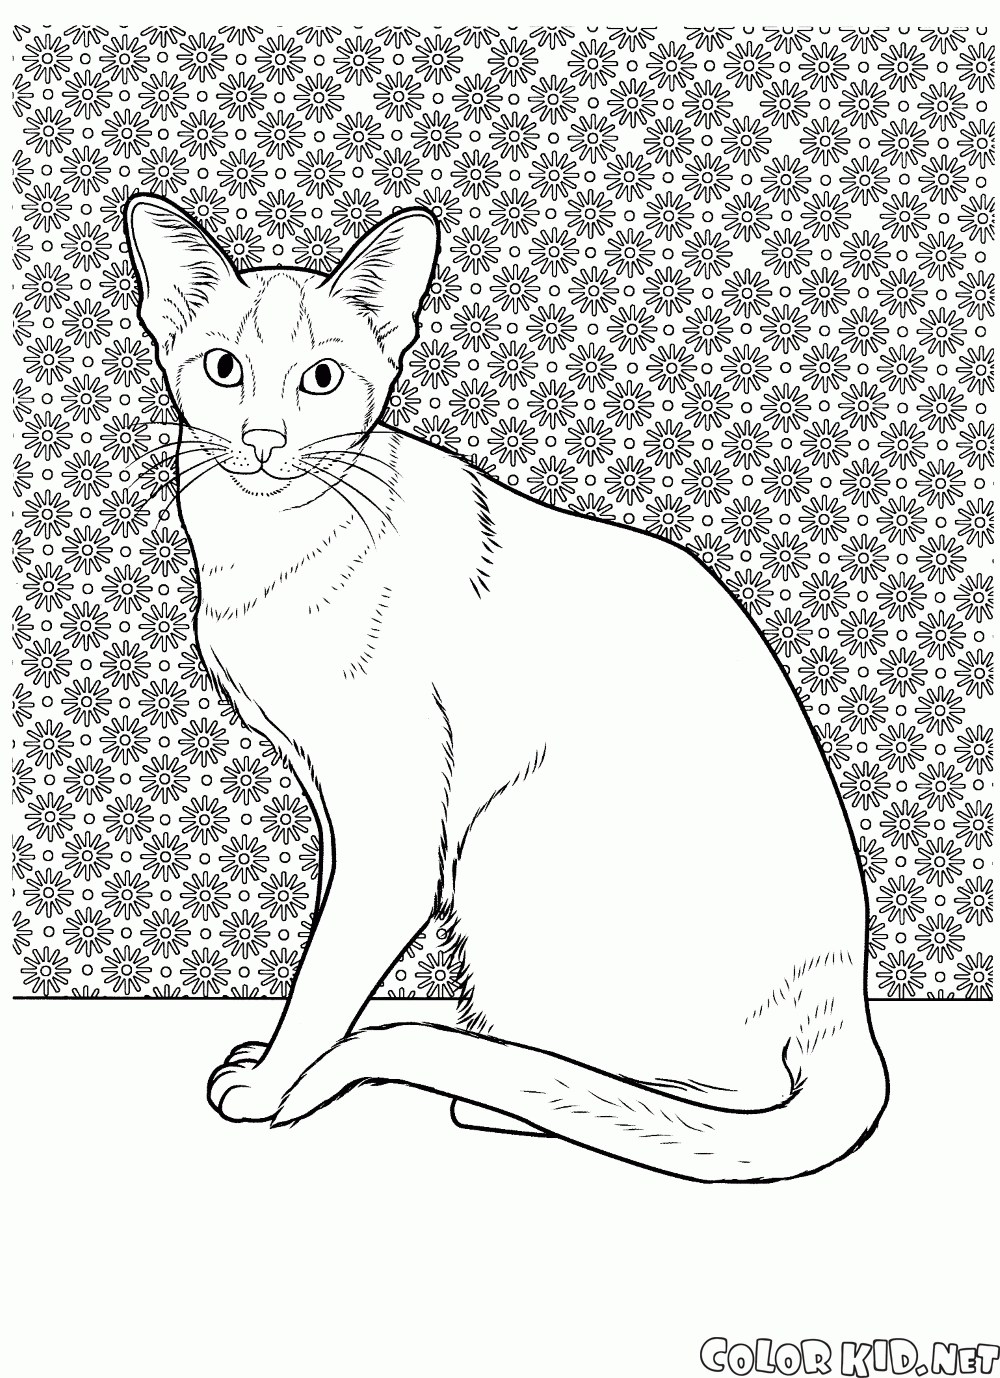 Download Coloring page - Cats